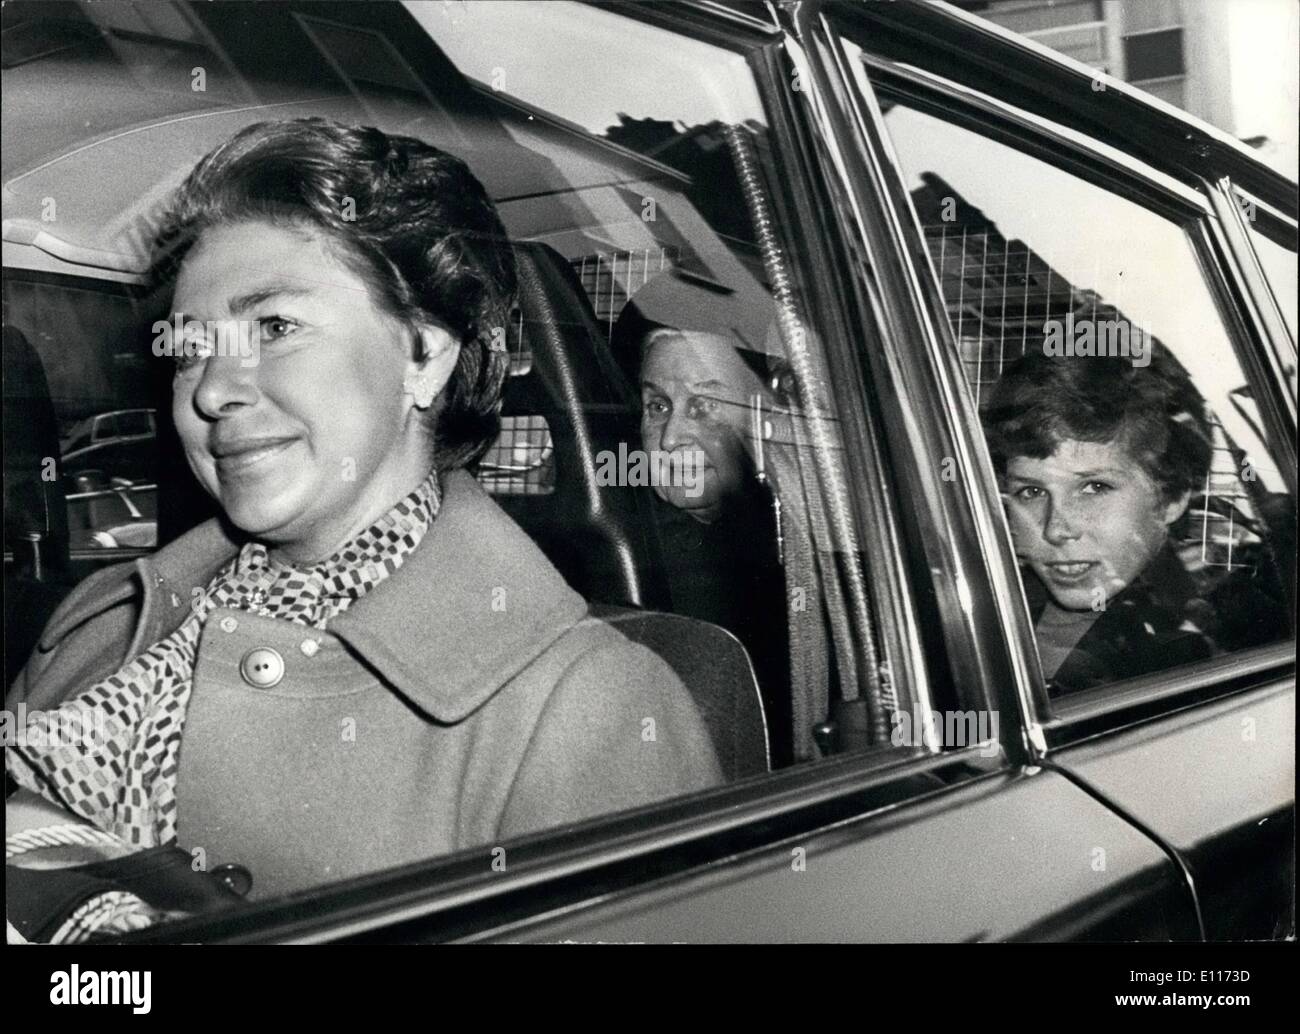 Mar. 03, 1976 - Princess Margaret's Marriage To Lord Snowdon Is Over - Official: The 15-year marriage of Princess Margaret and Lord Snowdon is ever. This was announced this afternoon in an official statement from the couple's home, Kensington Palace. The statement said ; Her Royal Highness Princess Margaret and Lord Snowdon have mutually agreed to live apart. Princess Margaret will carry out her public functions unaccompanied by Lord Snowdon. There are no plans for divorce proceedings Stock Photo